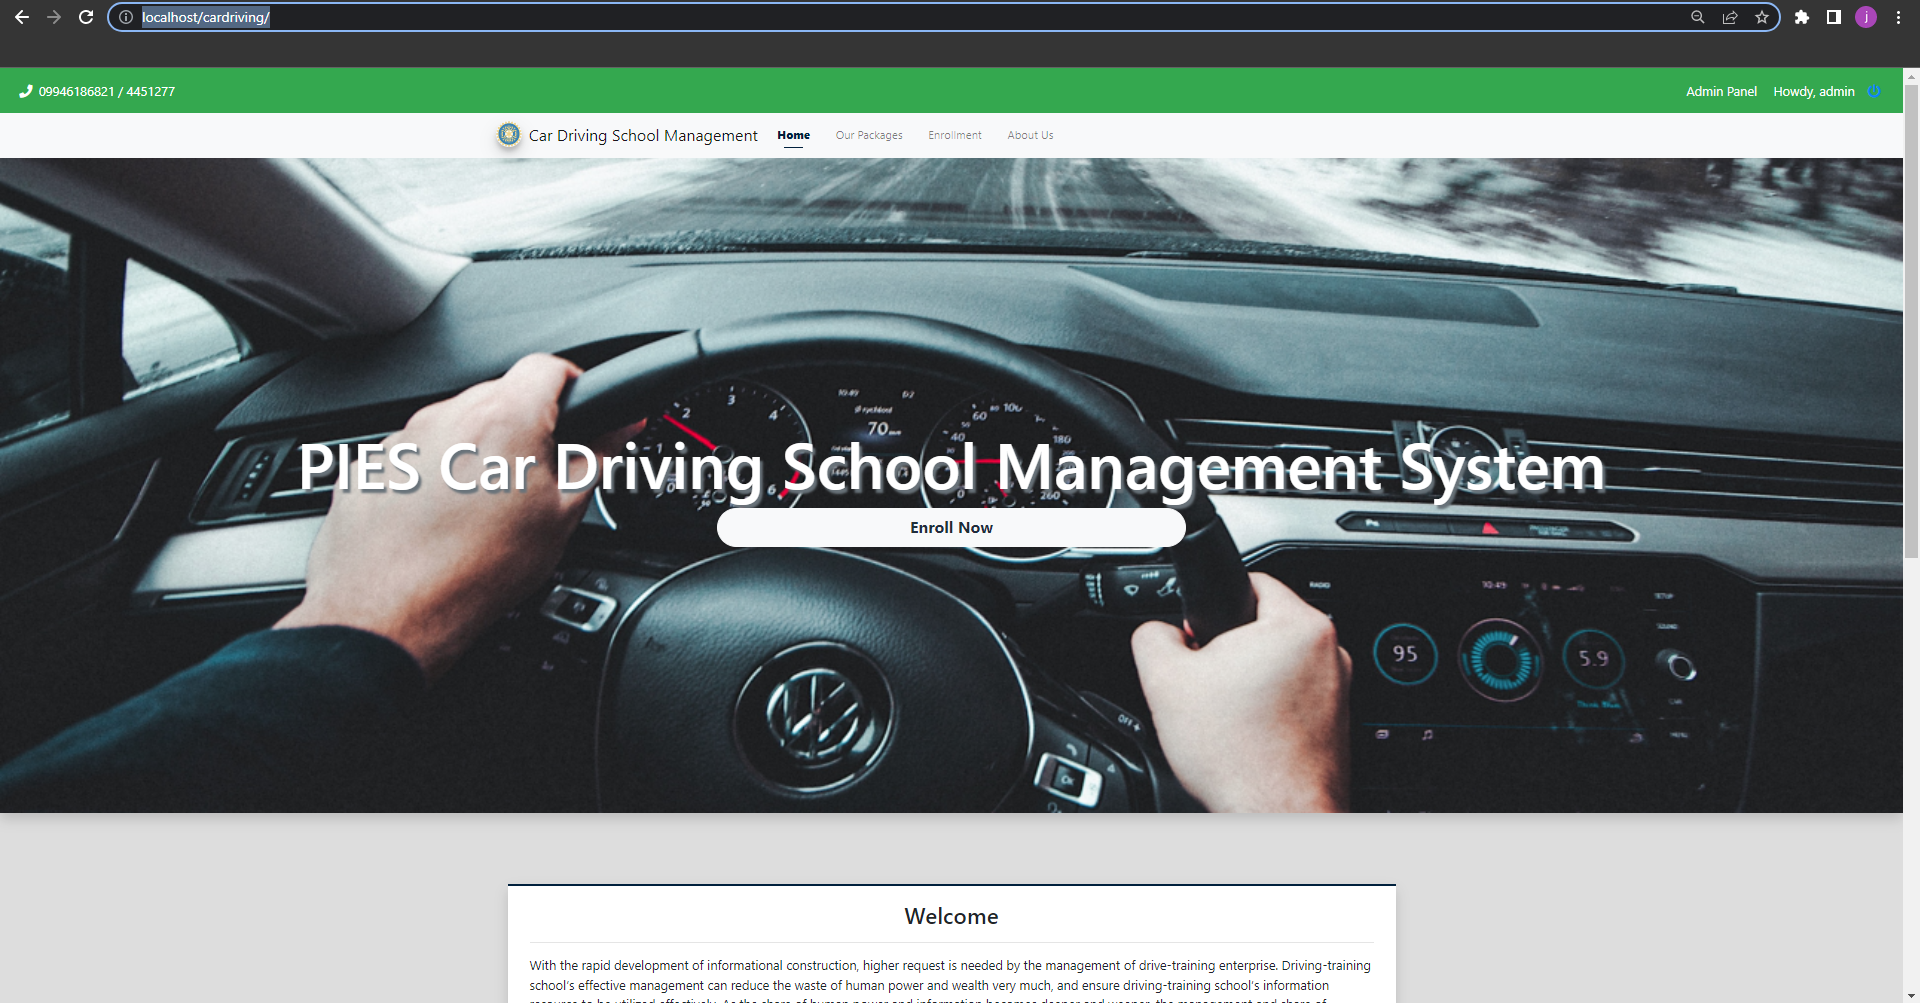 copy url in Car Driving School Management System in PHP